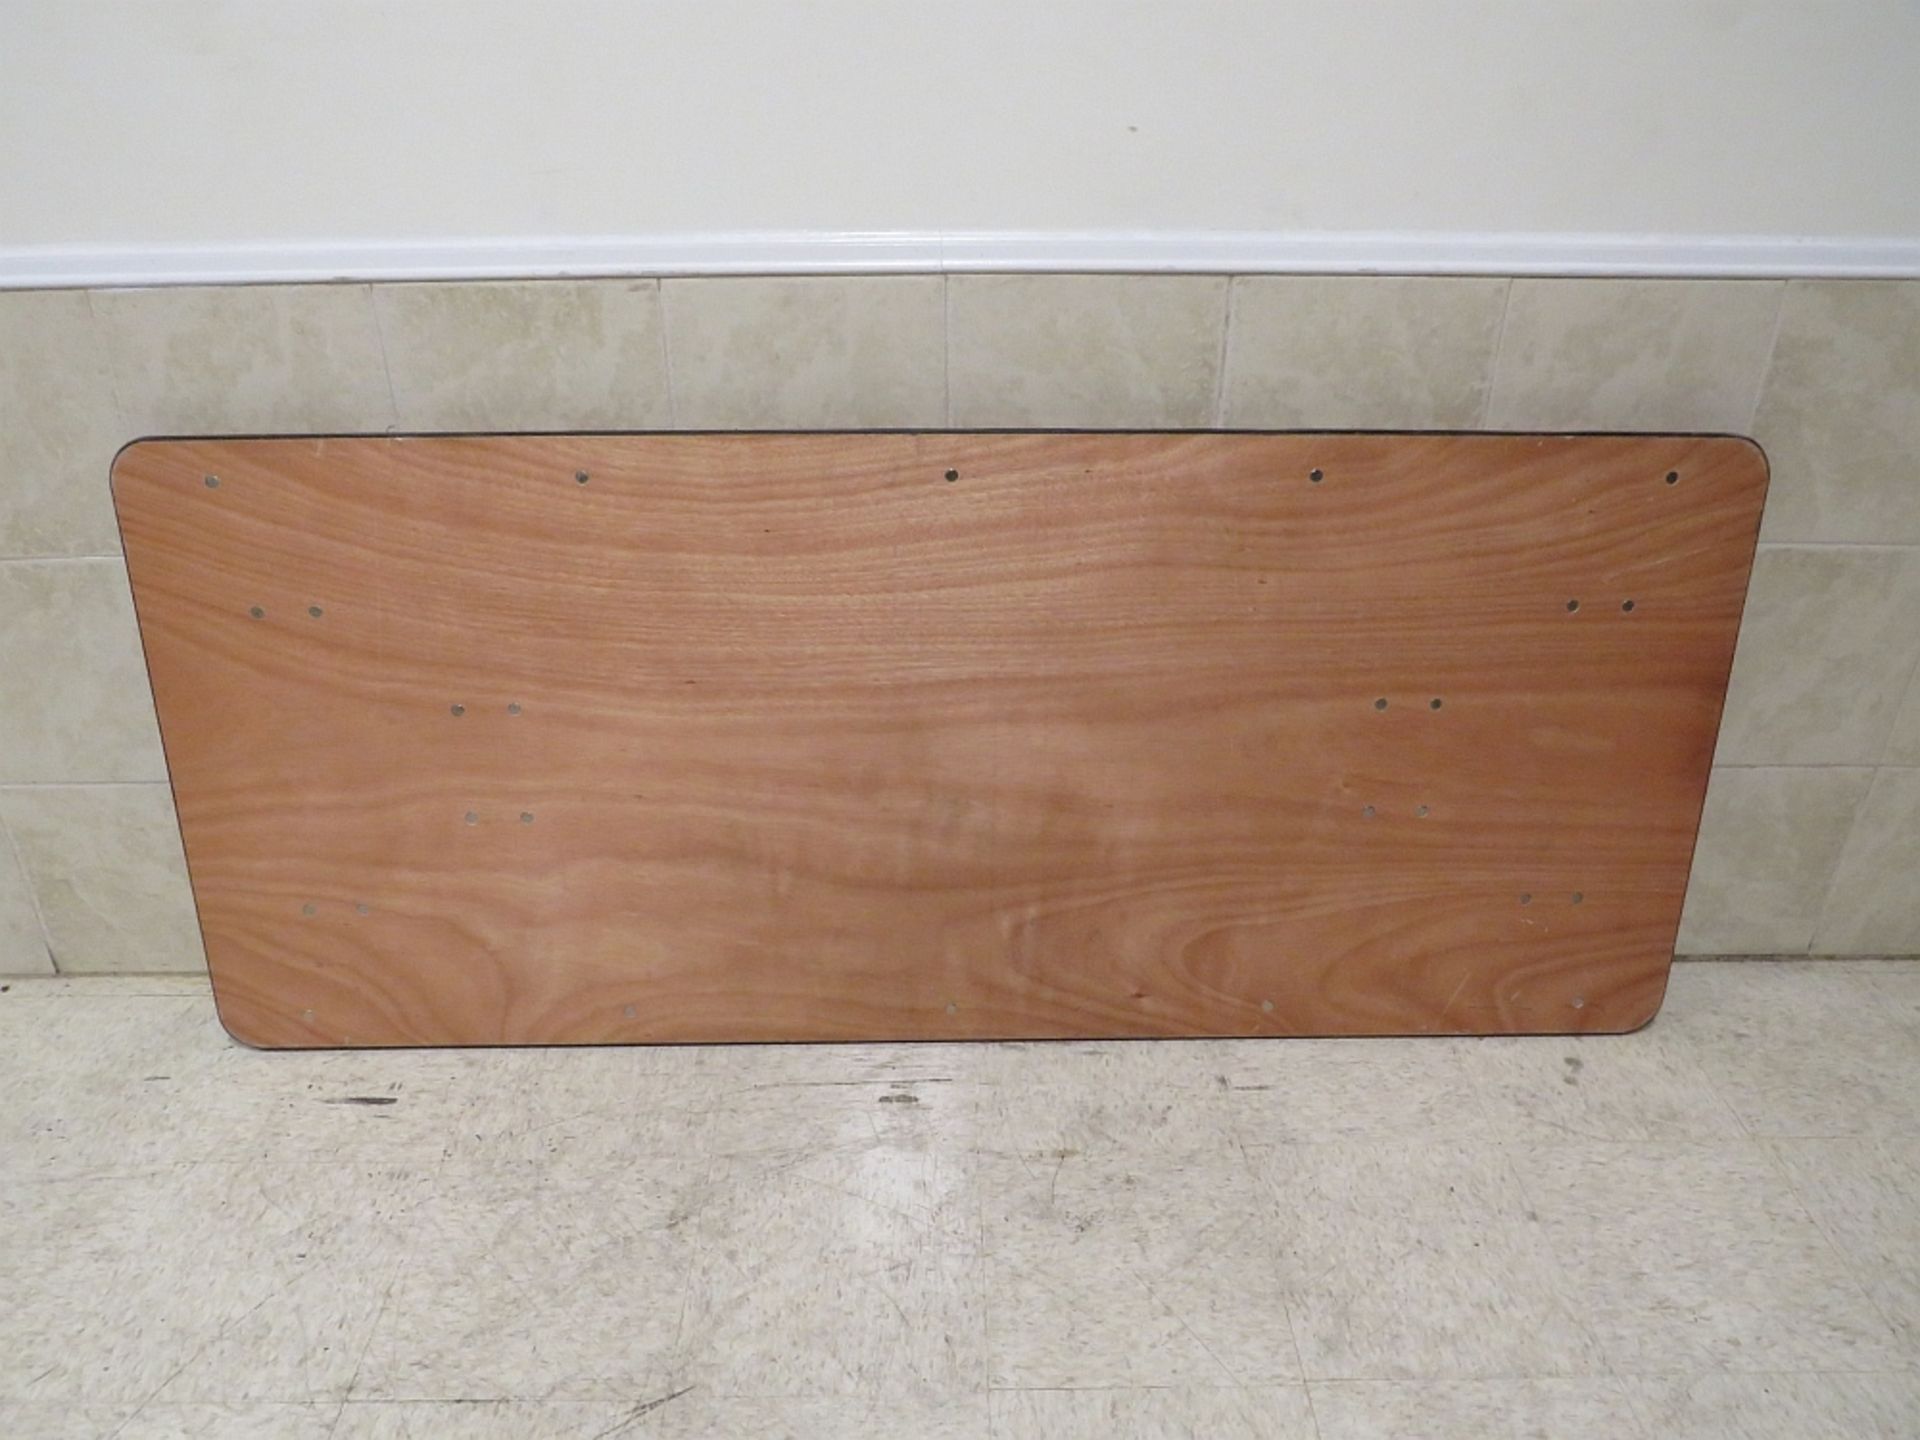 Table Rect - 6 ft x 30 in - Wood (seats 6) A Stock